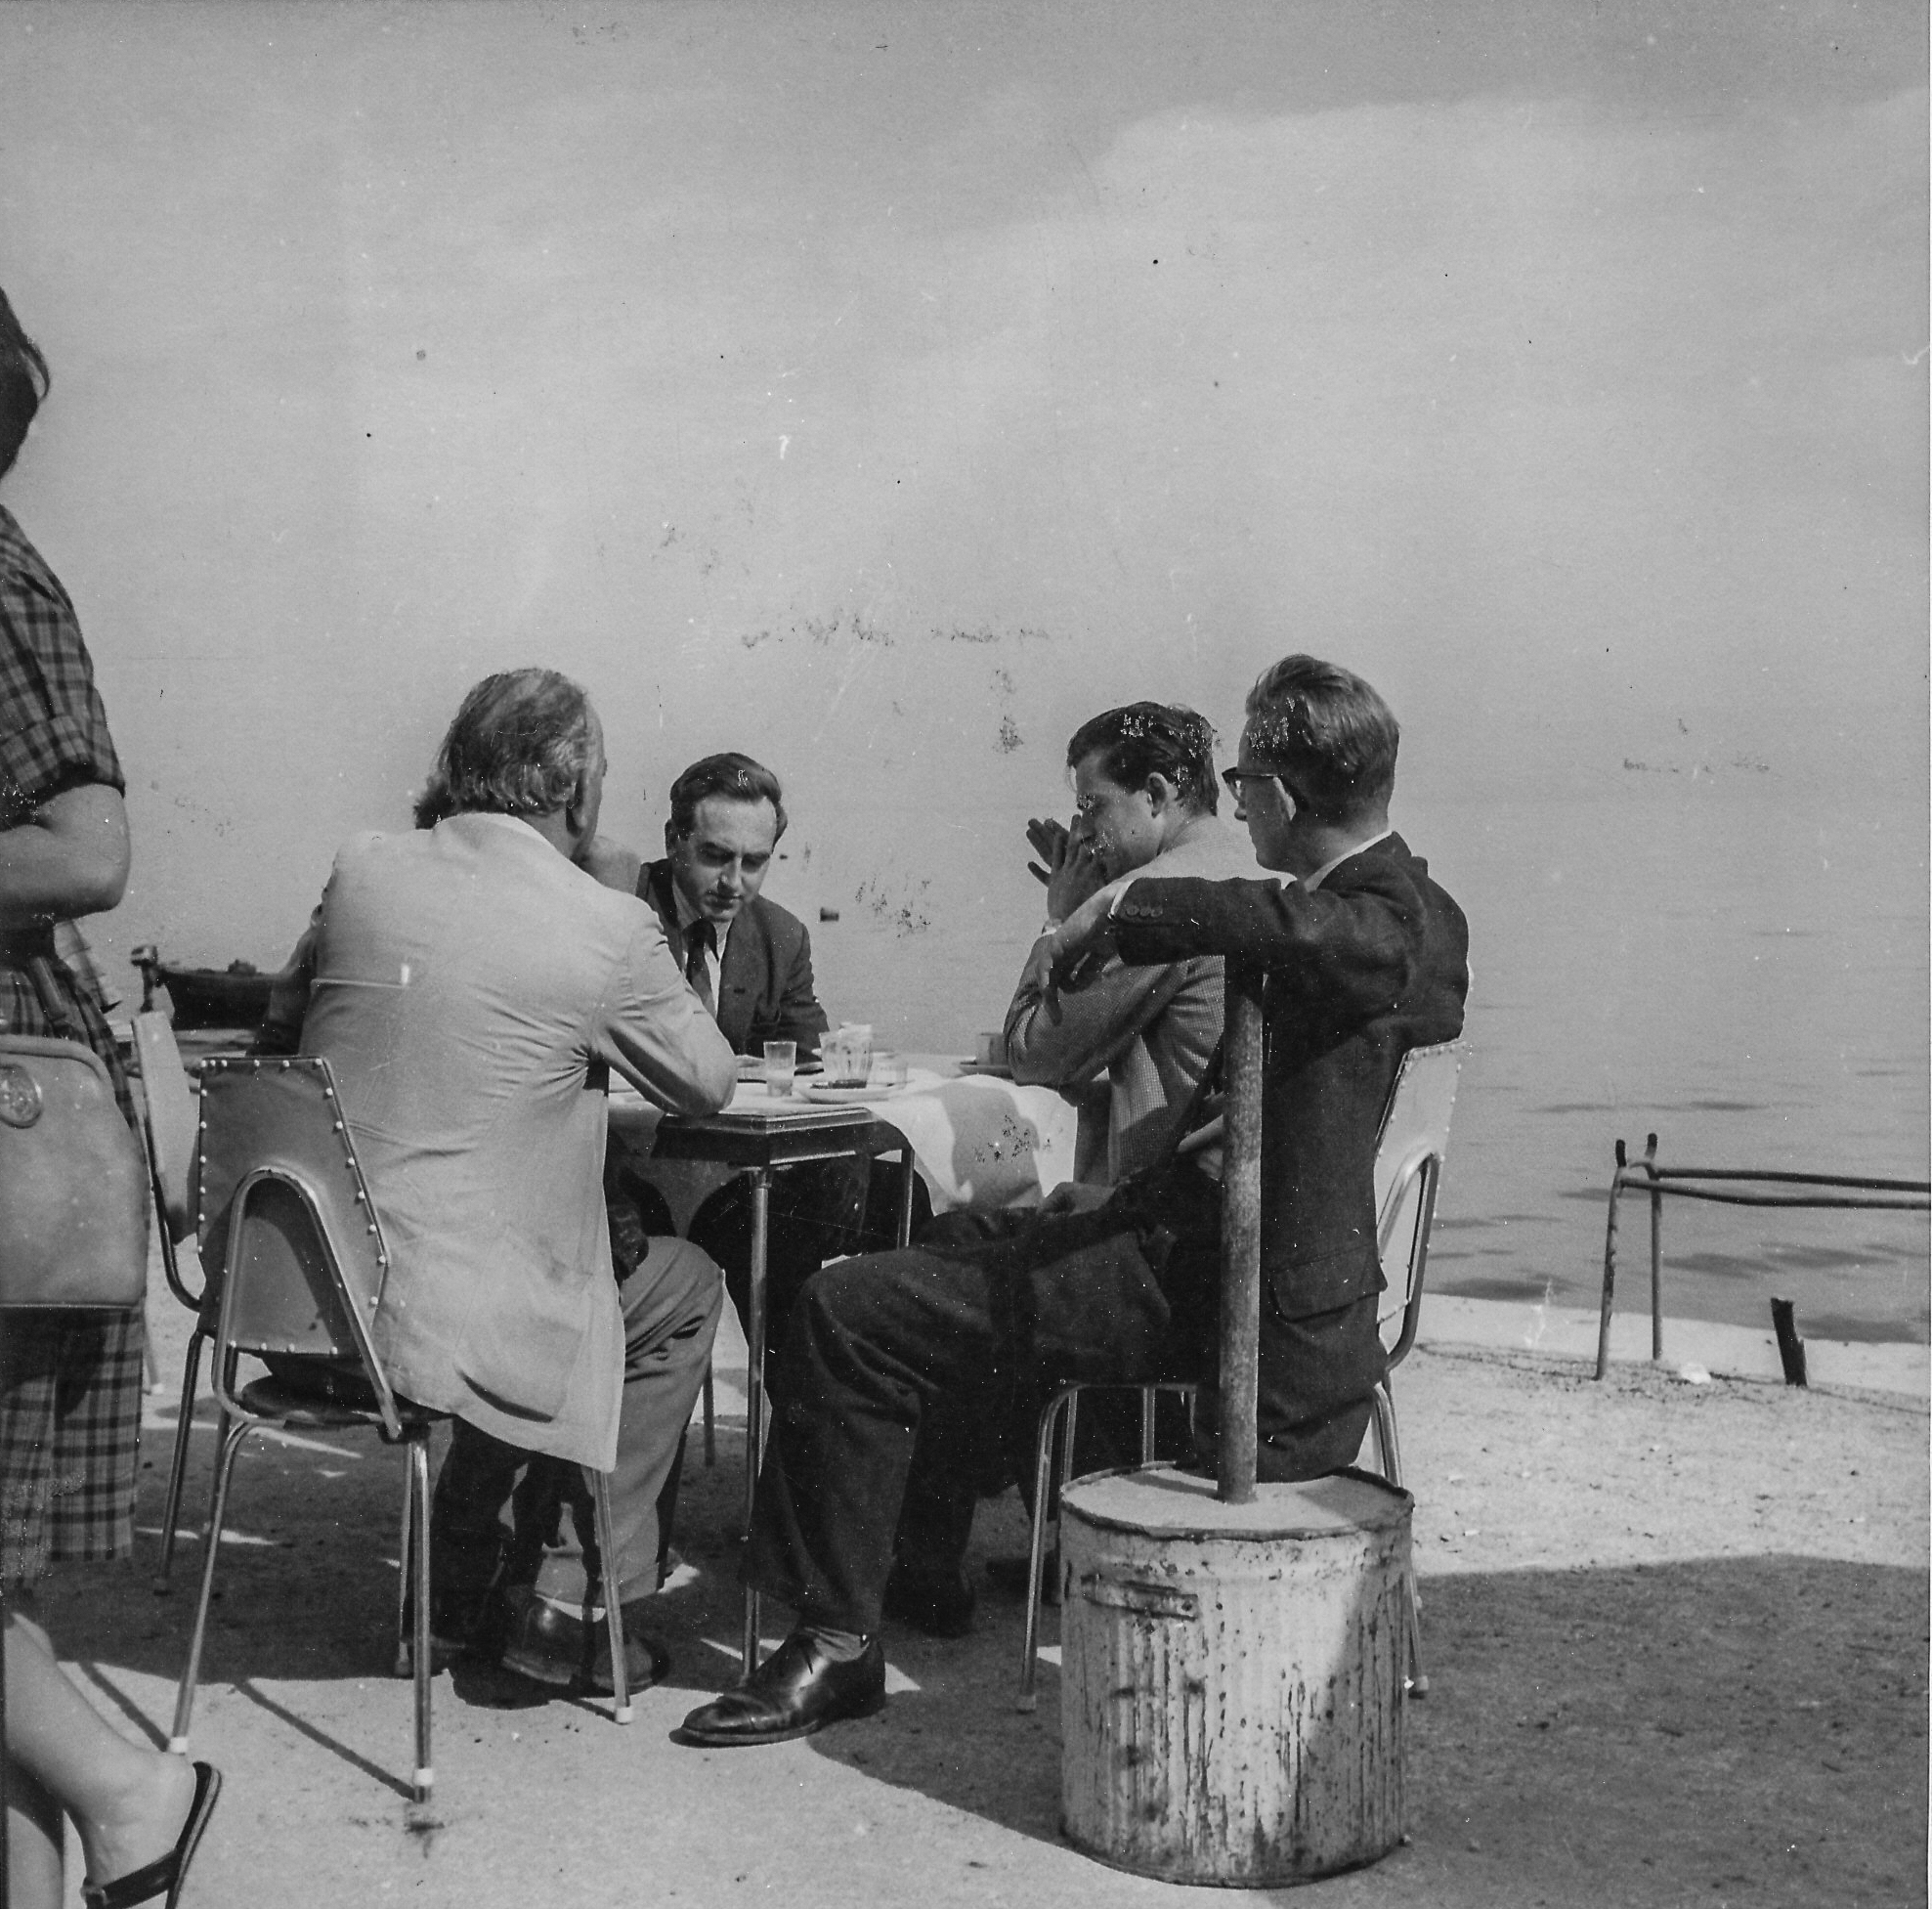 Peter analyses "al fresco" at Tel Aviv 1958 with Owen Hindle and (back to camera) Harry Golombek and Michael Haygarth : thanks Leonard Barden.